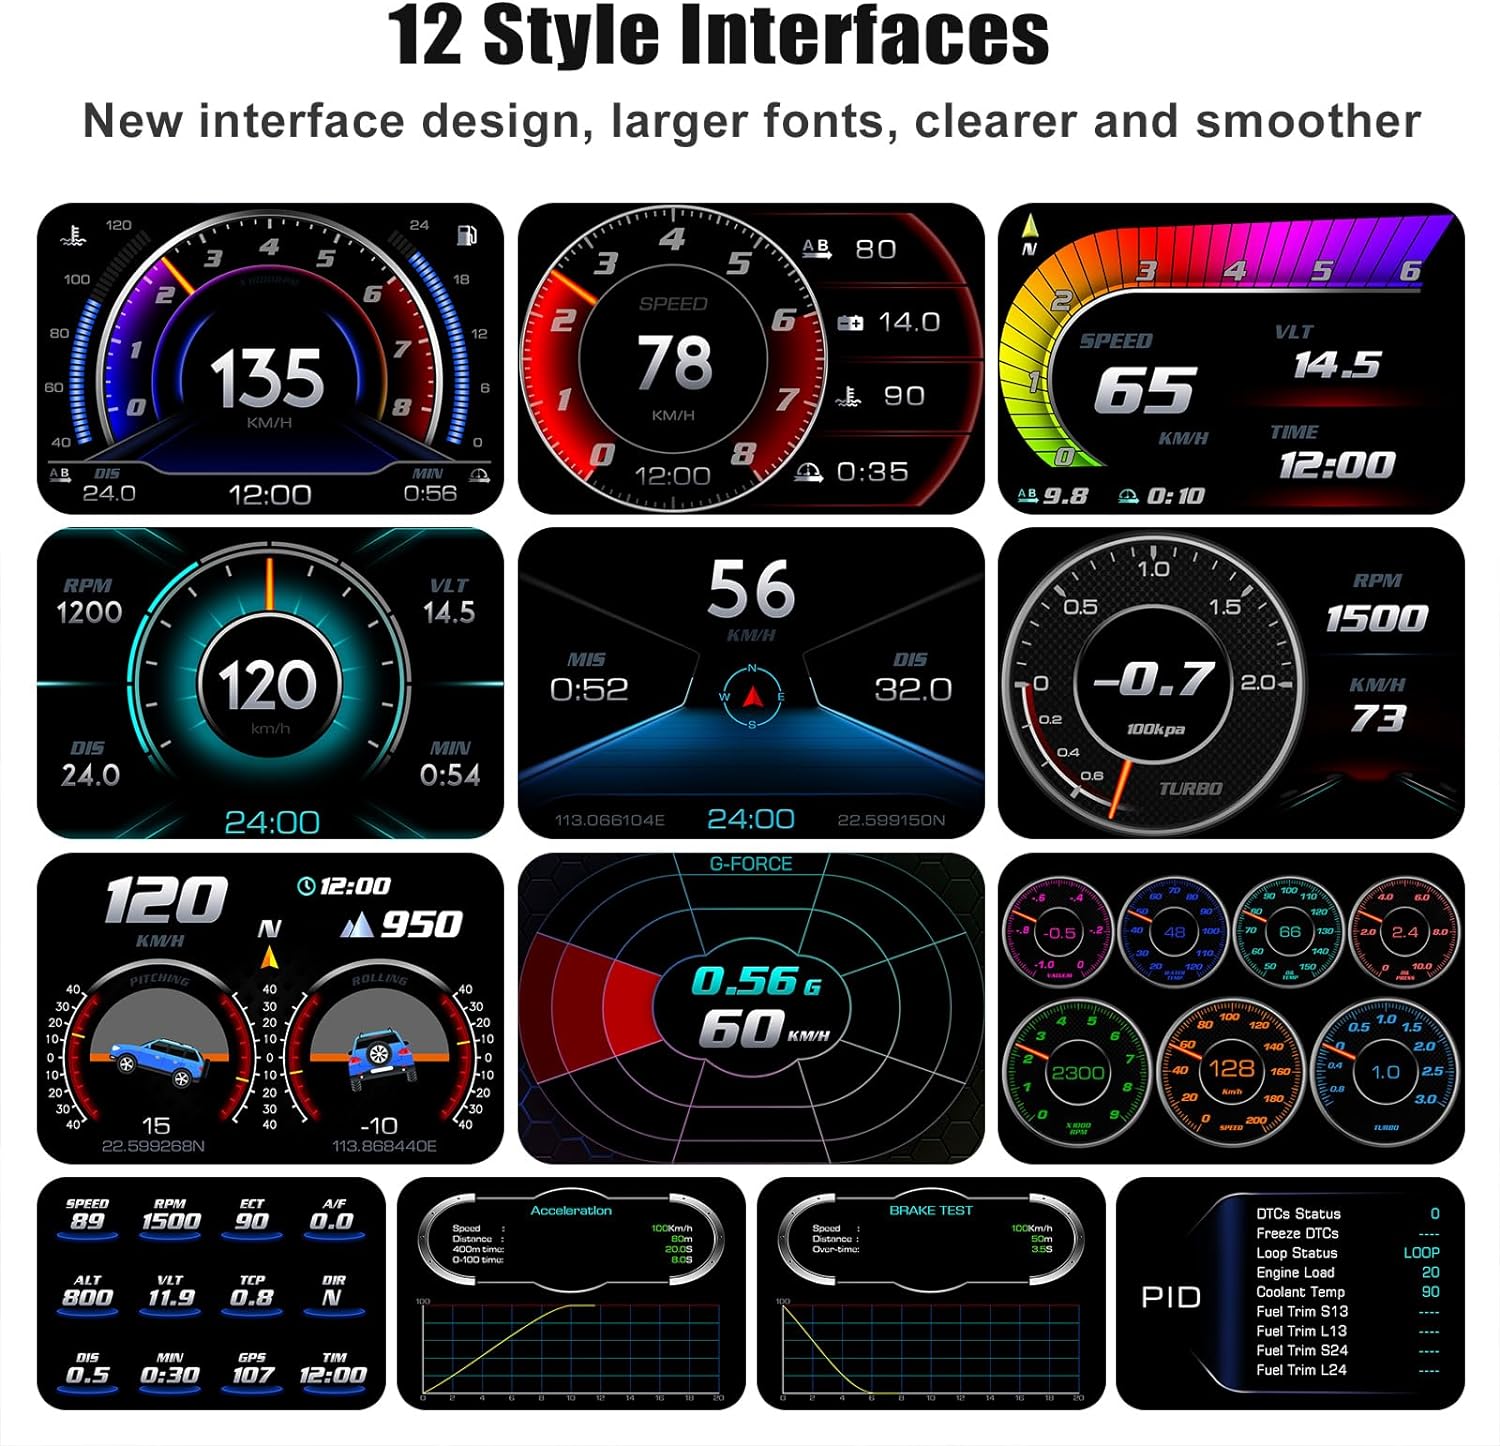 Acteam HUD Heads Up Display for Car, OBD+GPS Multi-Data Monitor Digital Speedometer Head Up Display, Overspeed Alarm RPM Water Temperature Turbo Pressure Smart Gauge for Most Vehicles After 2008